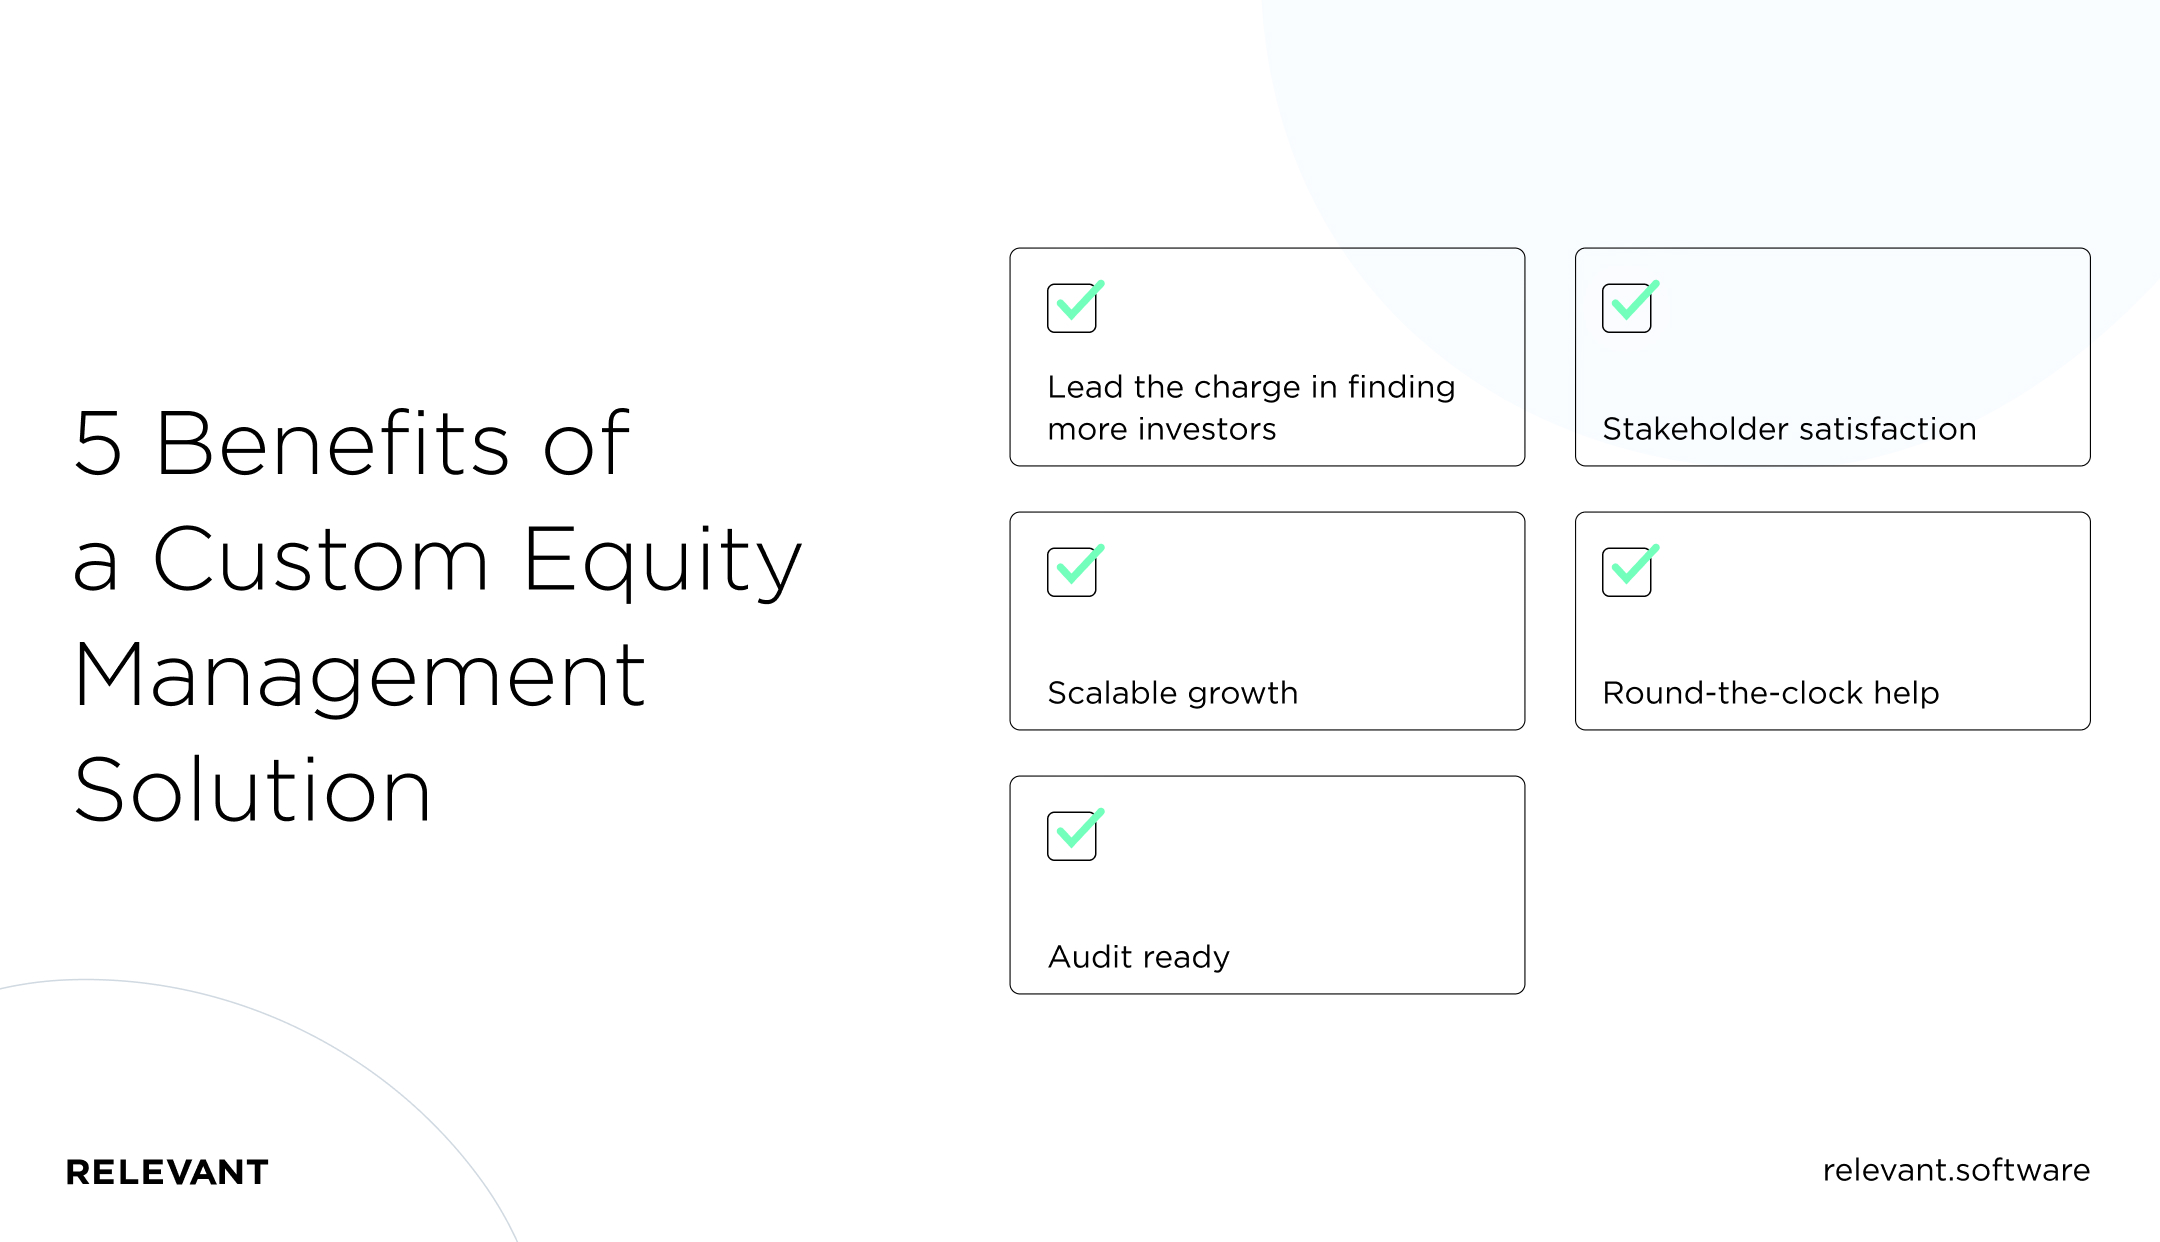 5 Benefits of a Custom Equity Management Solution